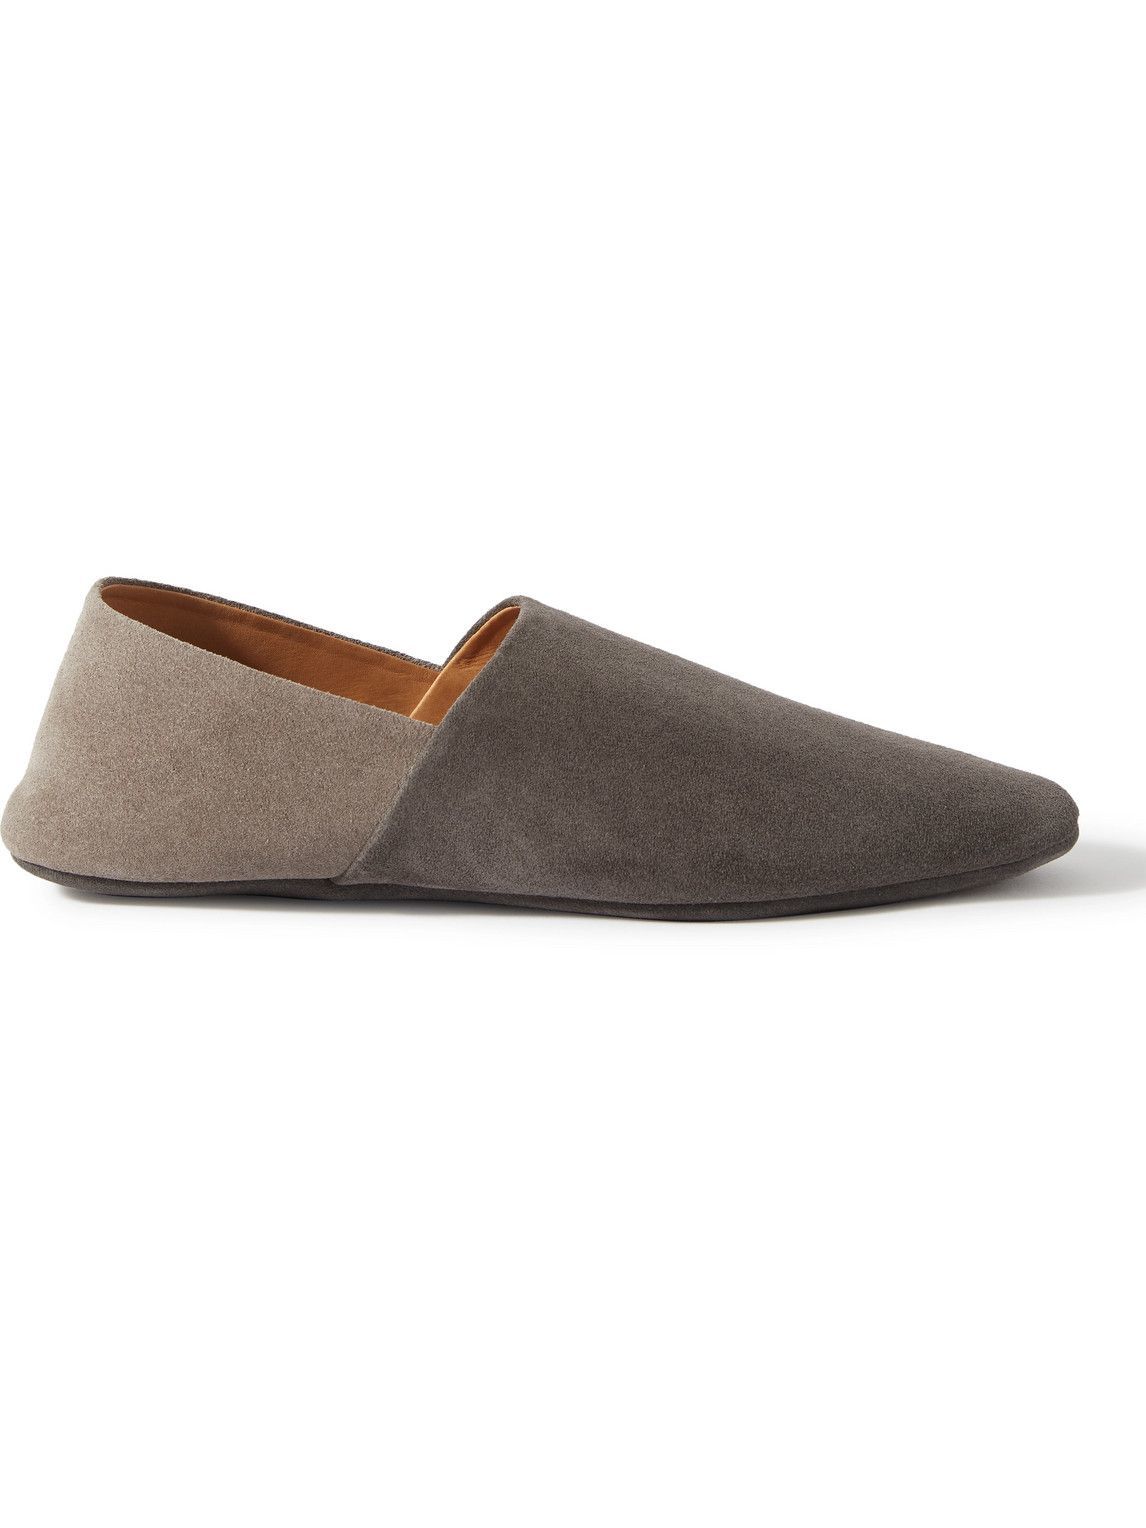 Mr P. - Collapsible-Heel Two-Tone Suede Travel Slippers - Gray Mr P.